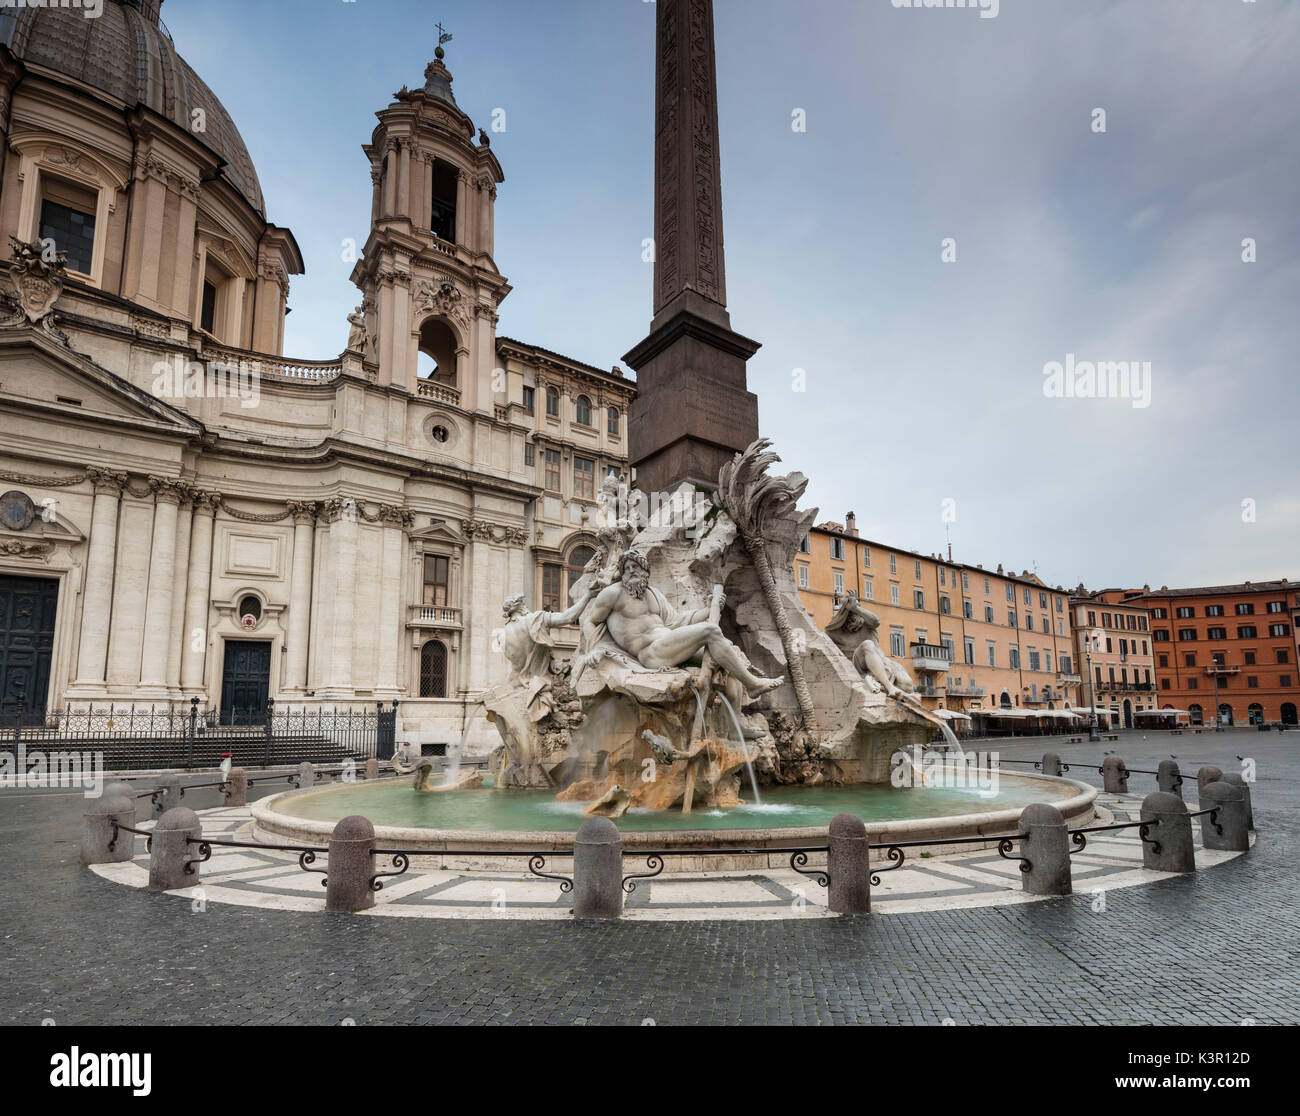 Panorama of Piazza Navona with Fountain of the Four Rivers and the Egyptian obelisk in the middle Rome Lazio Italy Europe Stock Photo